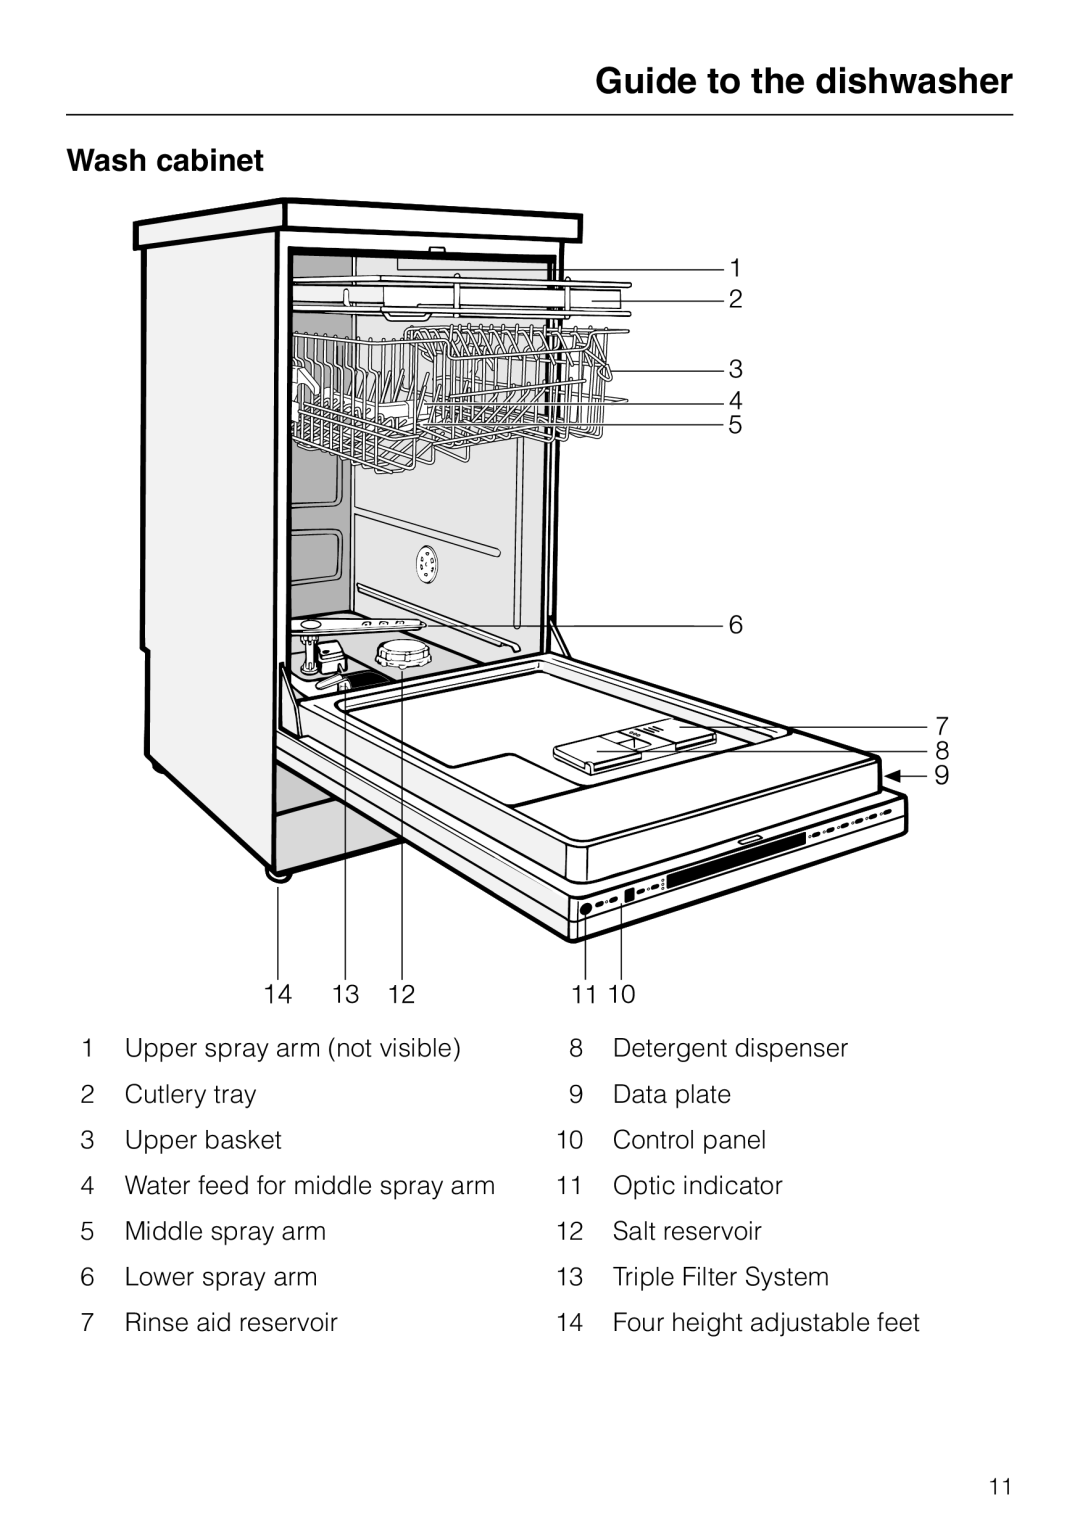 Miele G 818 SCVI operating instructions Guide to the dishwasher, Wash cabinet 